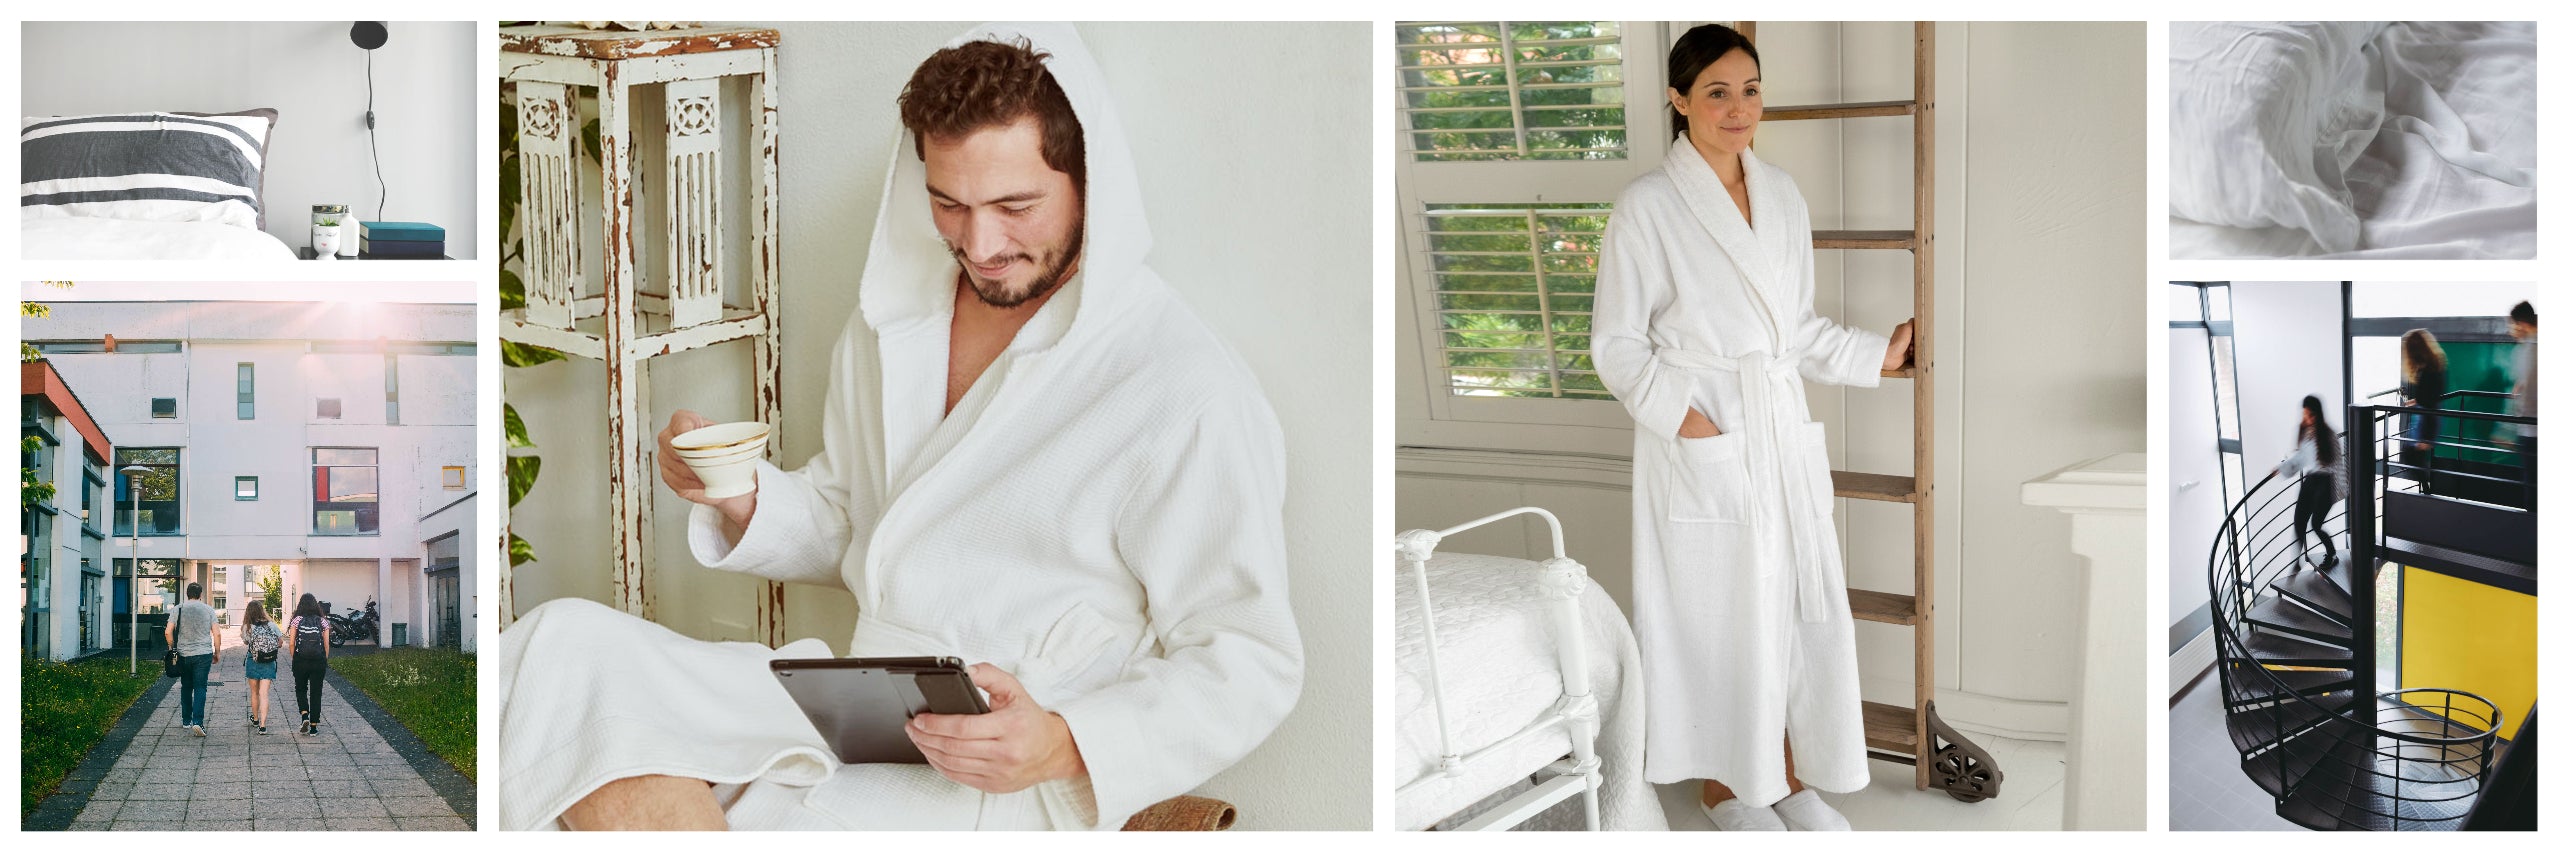 Bathrobes are a necessity for college dorms.